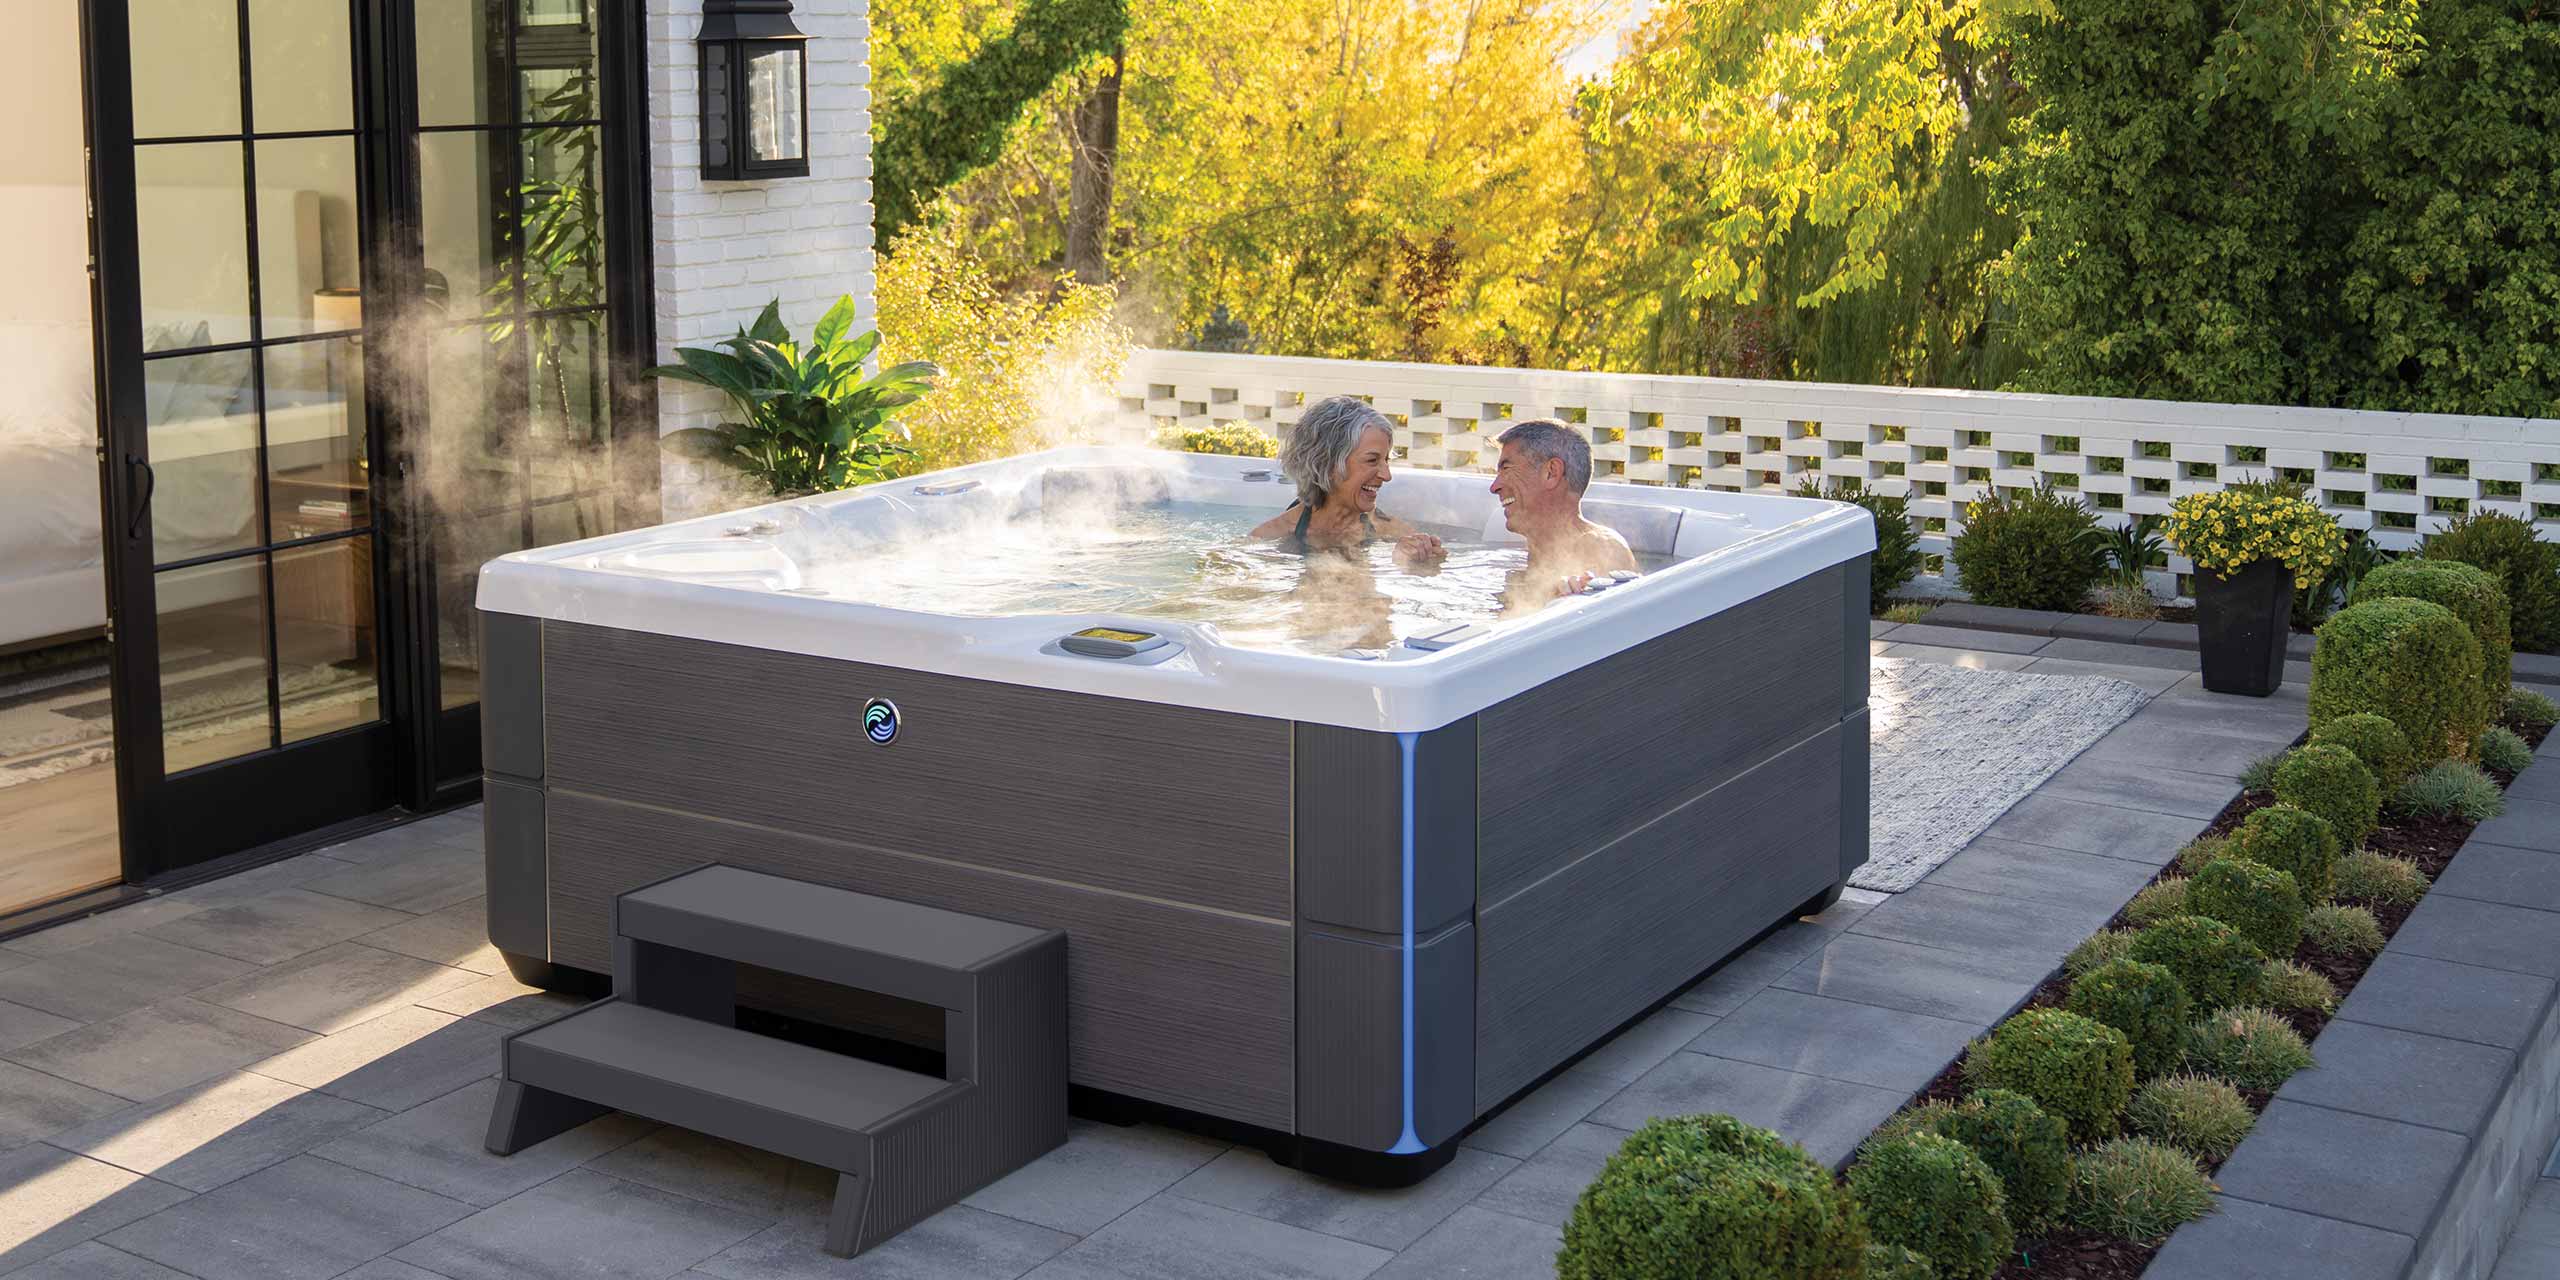 Older man and woman sitting in the highlife aria hot tub, laughing in the water. The hot tub is Alpine white & Charcoal and they are on a patio with green shrubs surrounding the hot tub.